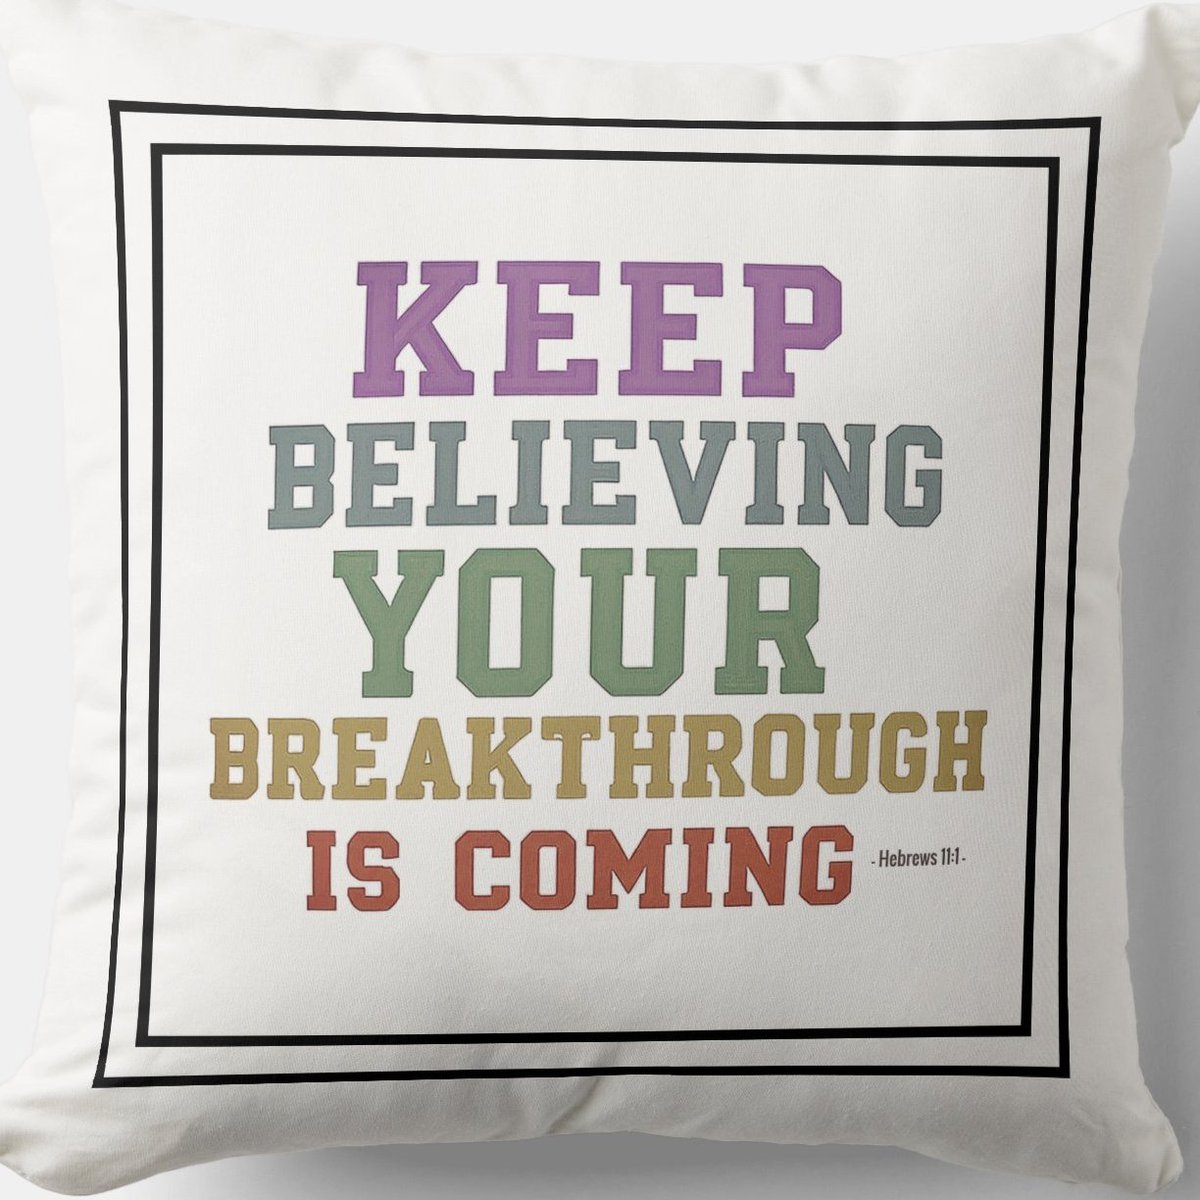 Keep Believing Your Breakthrough is Coming zazzle.com/keep_believing… Throw #Pillow #Blessing #JesusChrist #JesusSaves #Jesus #christian #spiritual #Homedecoration #uniquegift #giftideas #MothersDayGifts #giftformom #giftidea #HolySpirit #pillows #giftshop #giftsforher #giftsformom